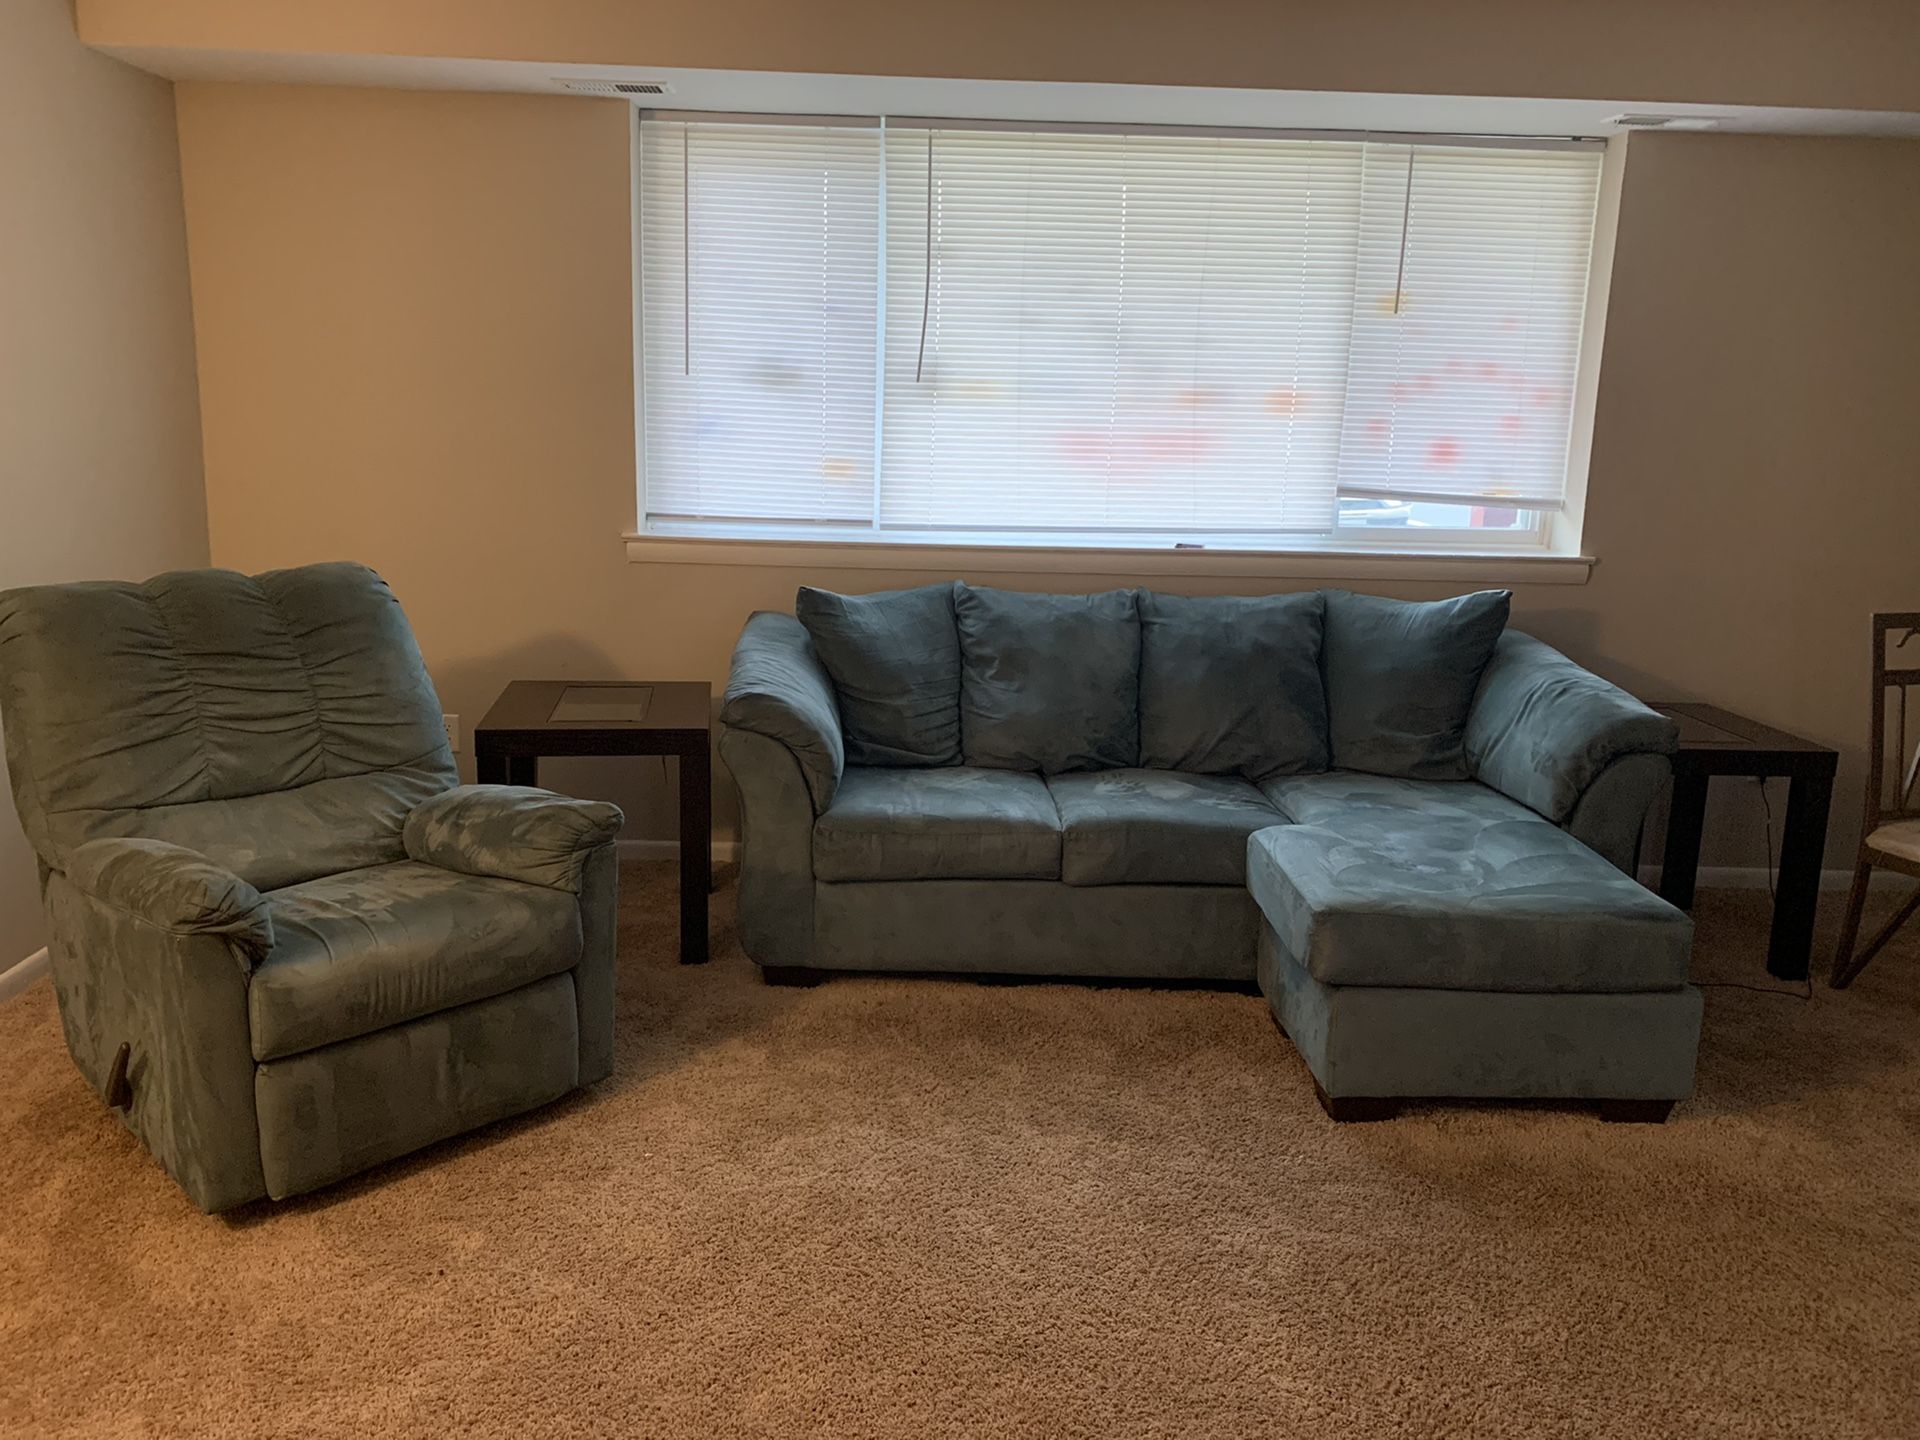 Couch set, end tables, dining room table